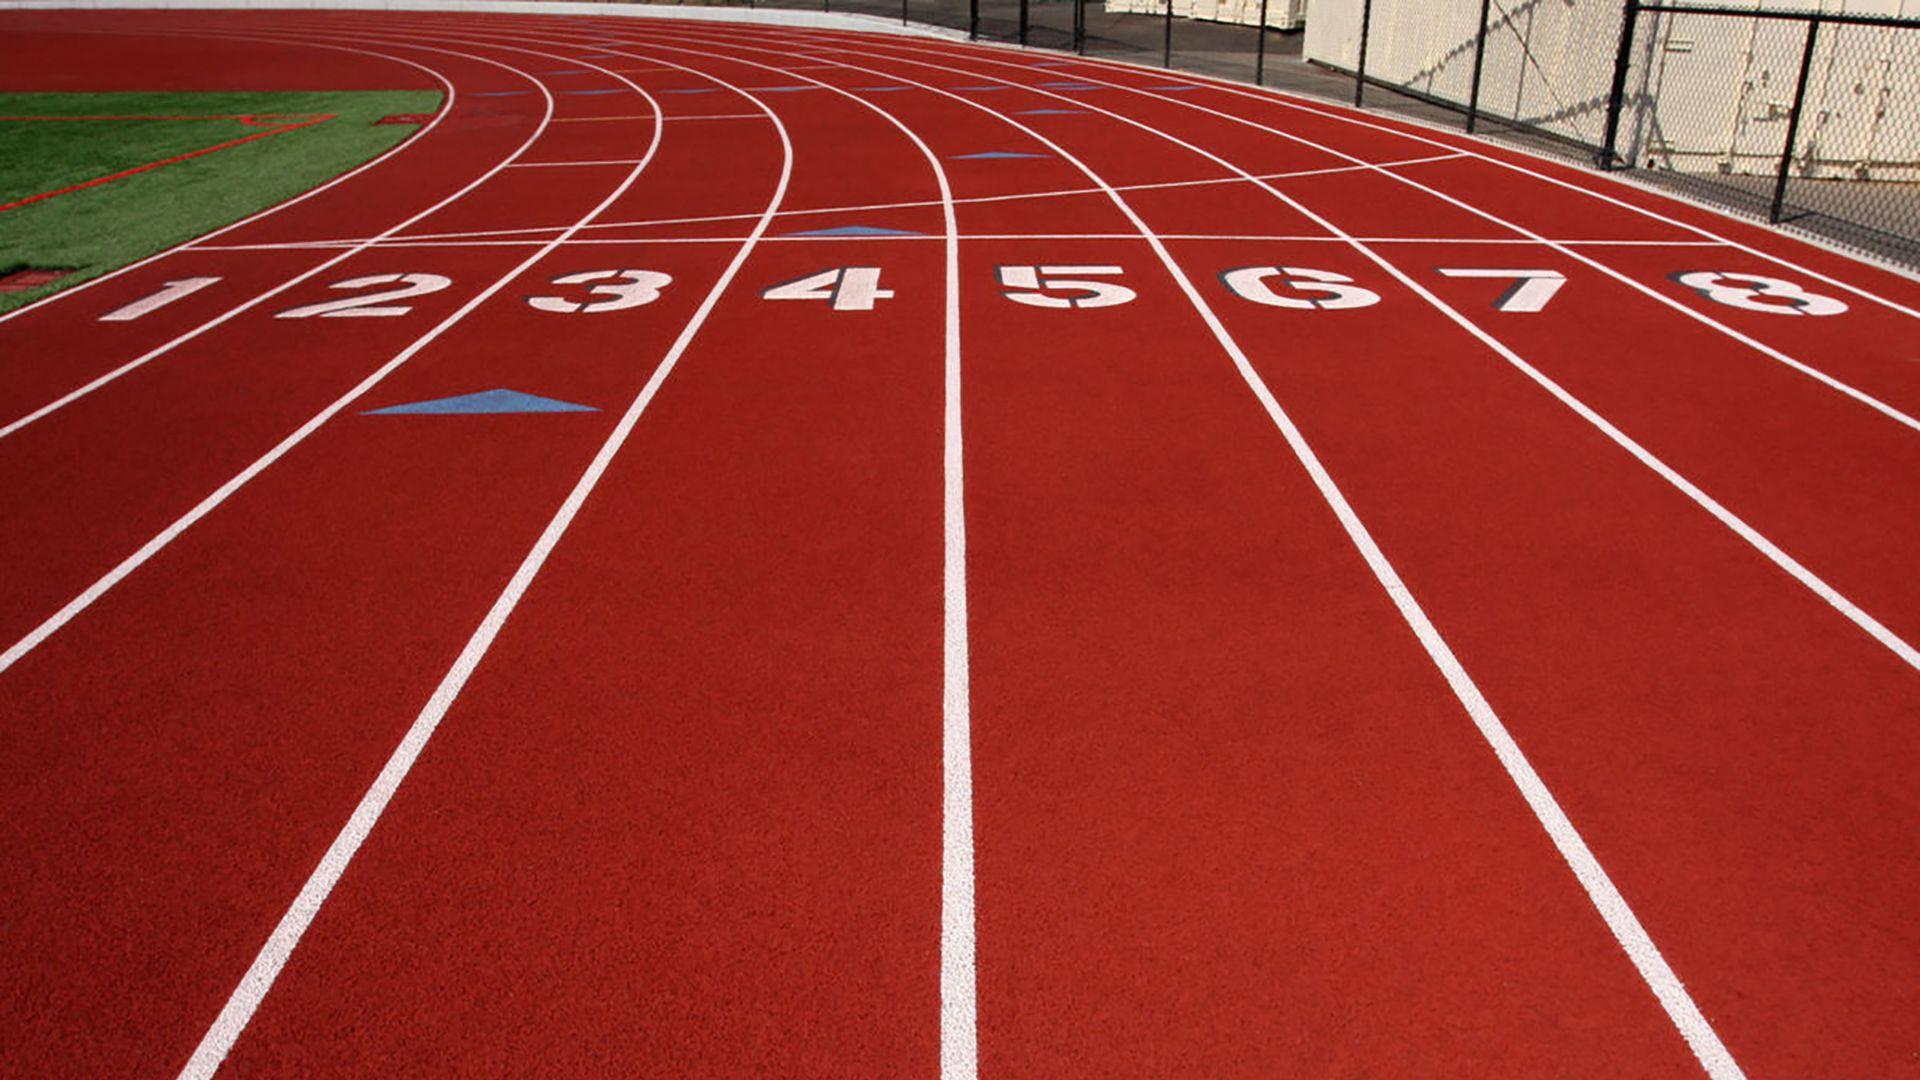 Track And Field Image Free Download Clip Art